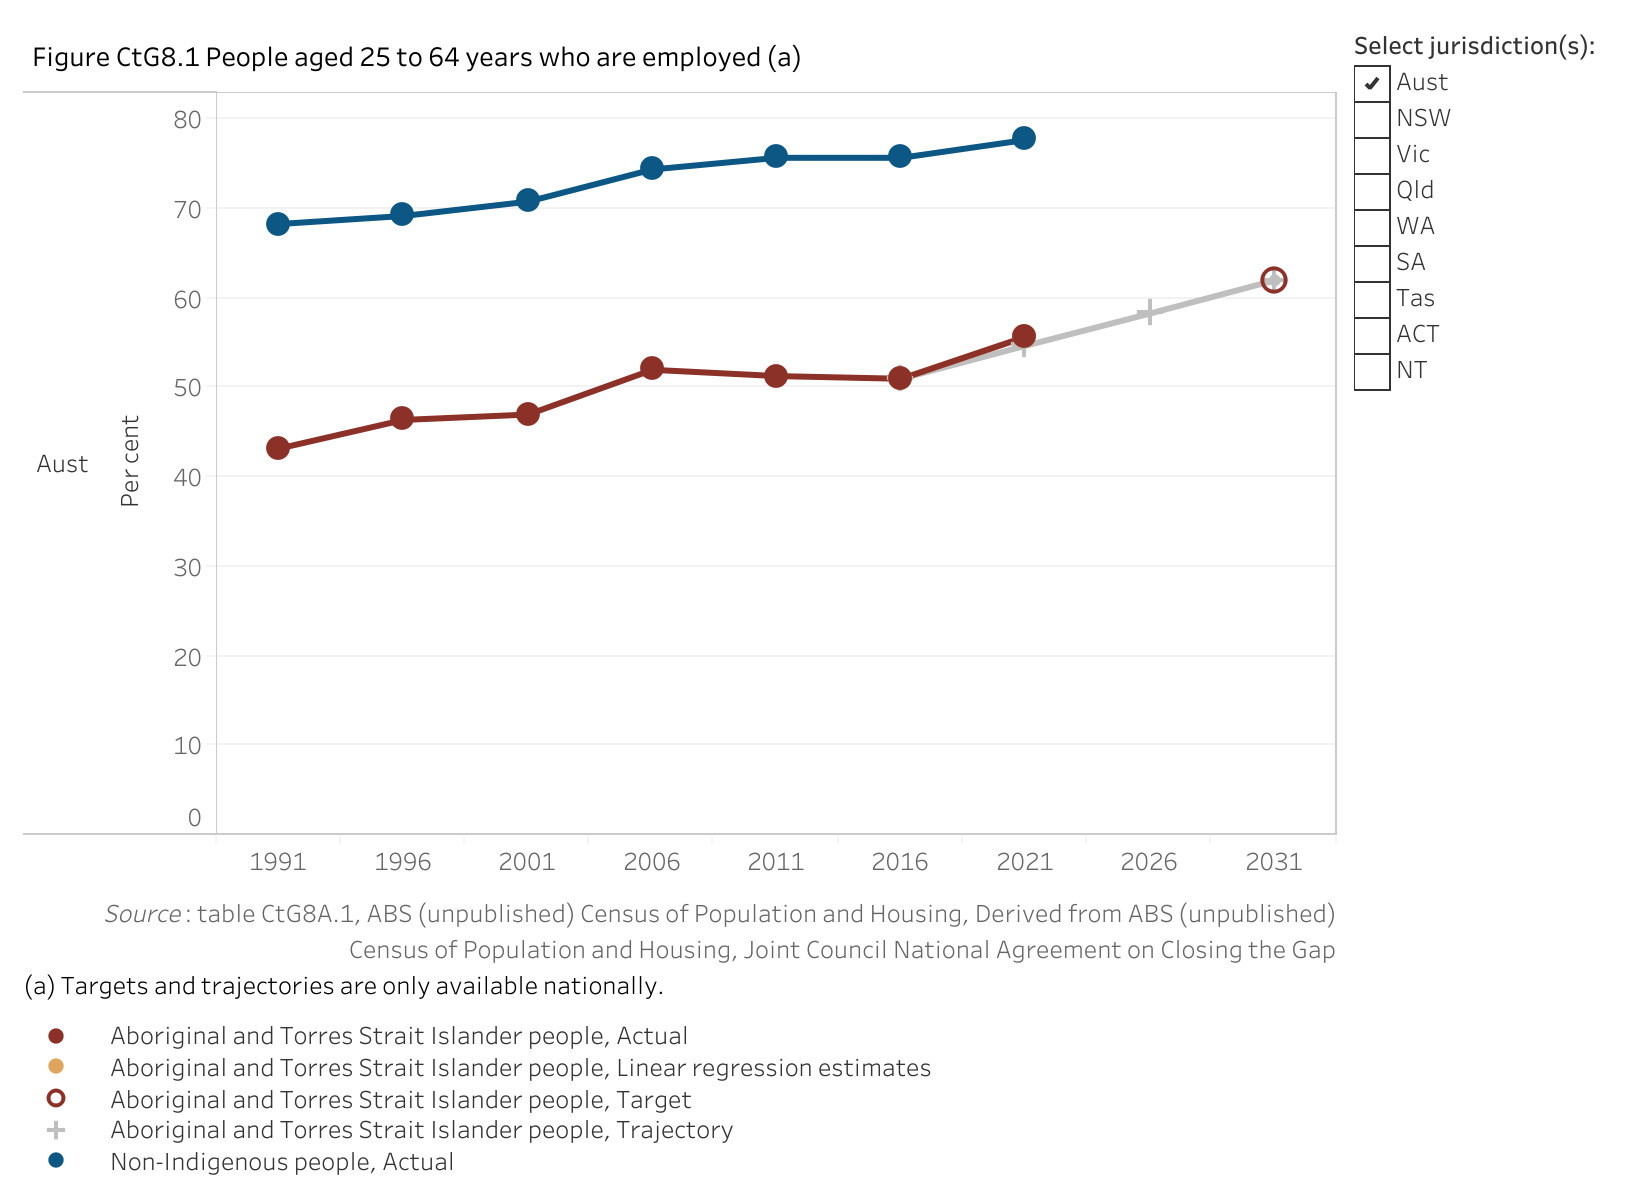 Figure CtG8.1 shows people aged 25 to 64 years who are employed. More details can be found within the text near this image.